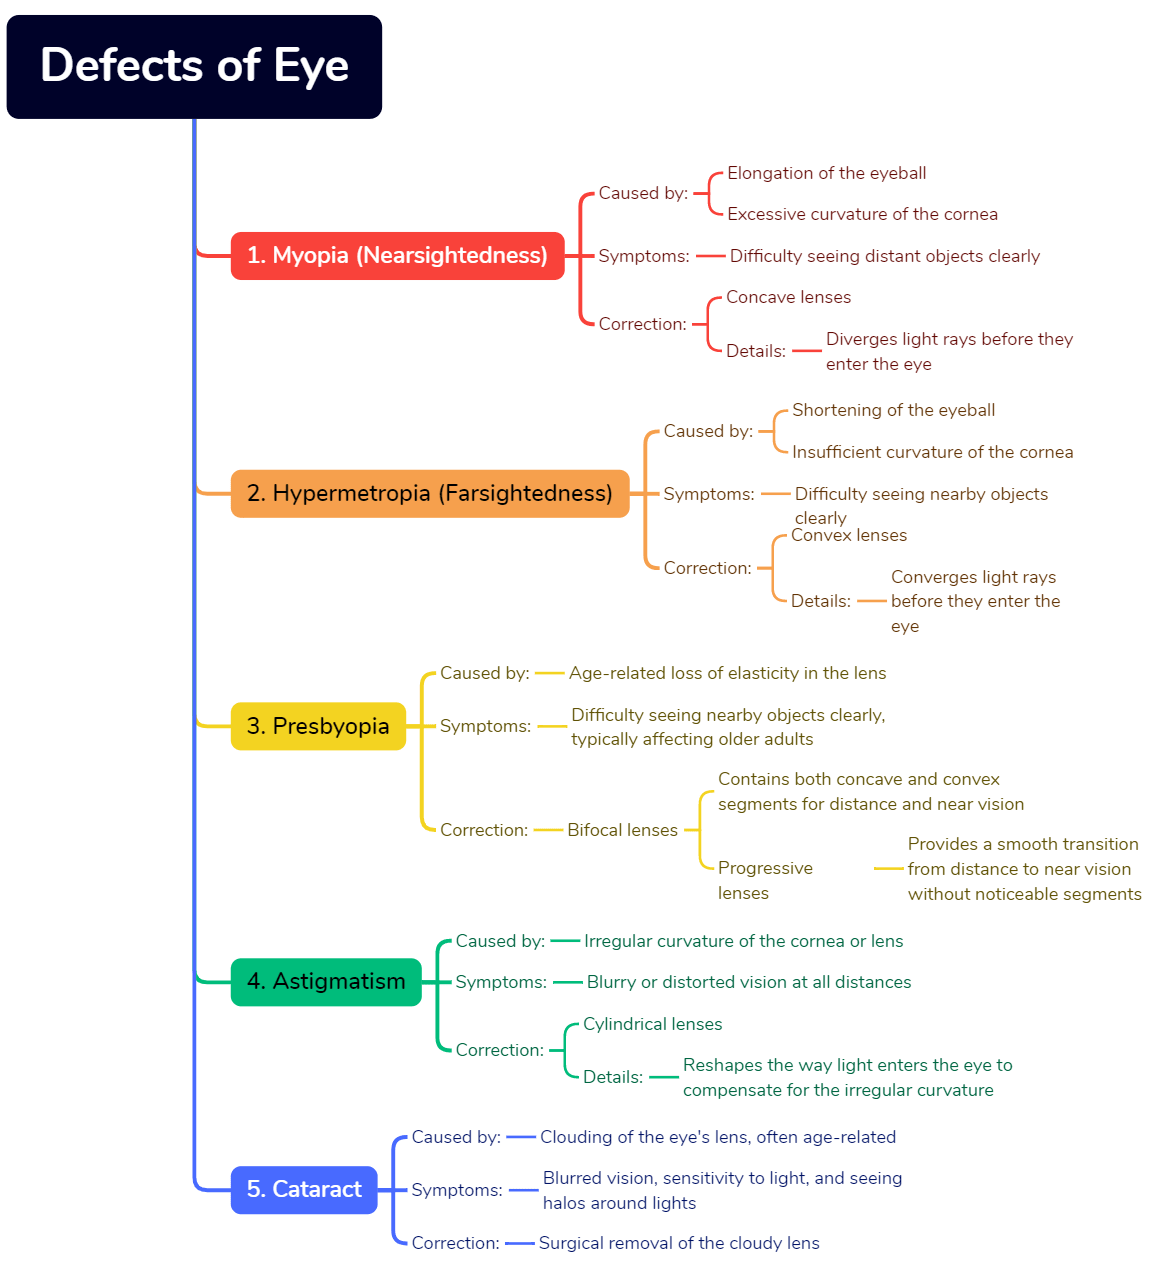 Defects of eye mind map